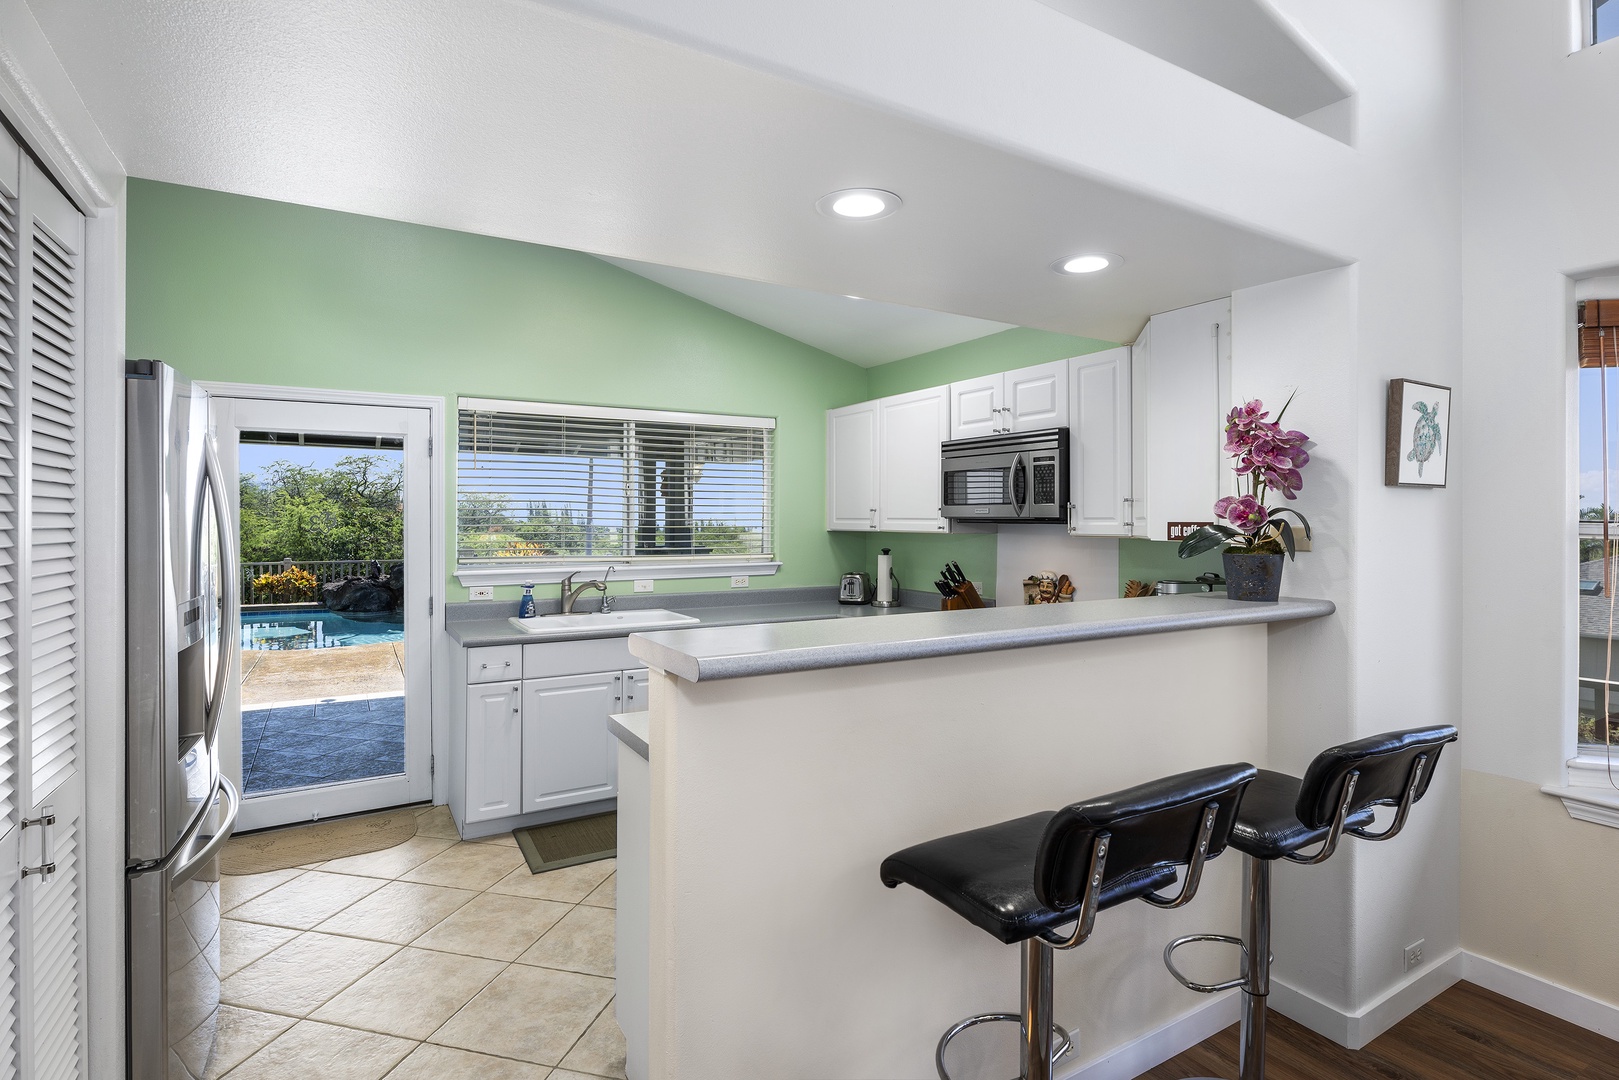 Kailua Kona Vacation Rentals, Malulani Retreat - Open kitchen with ample space for the chef and company